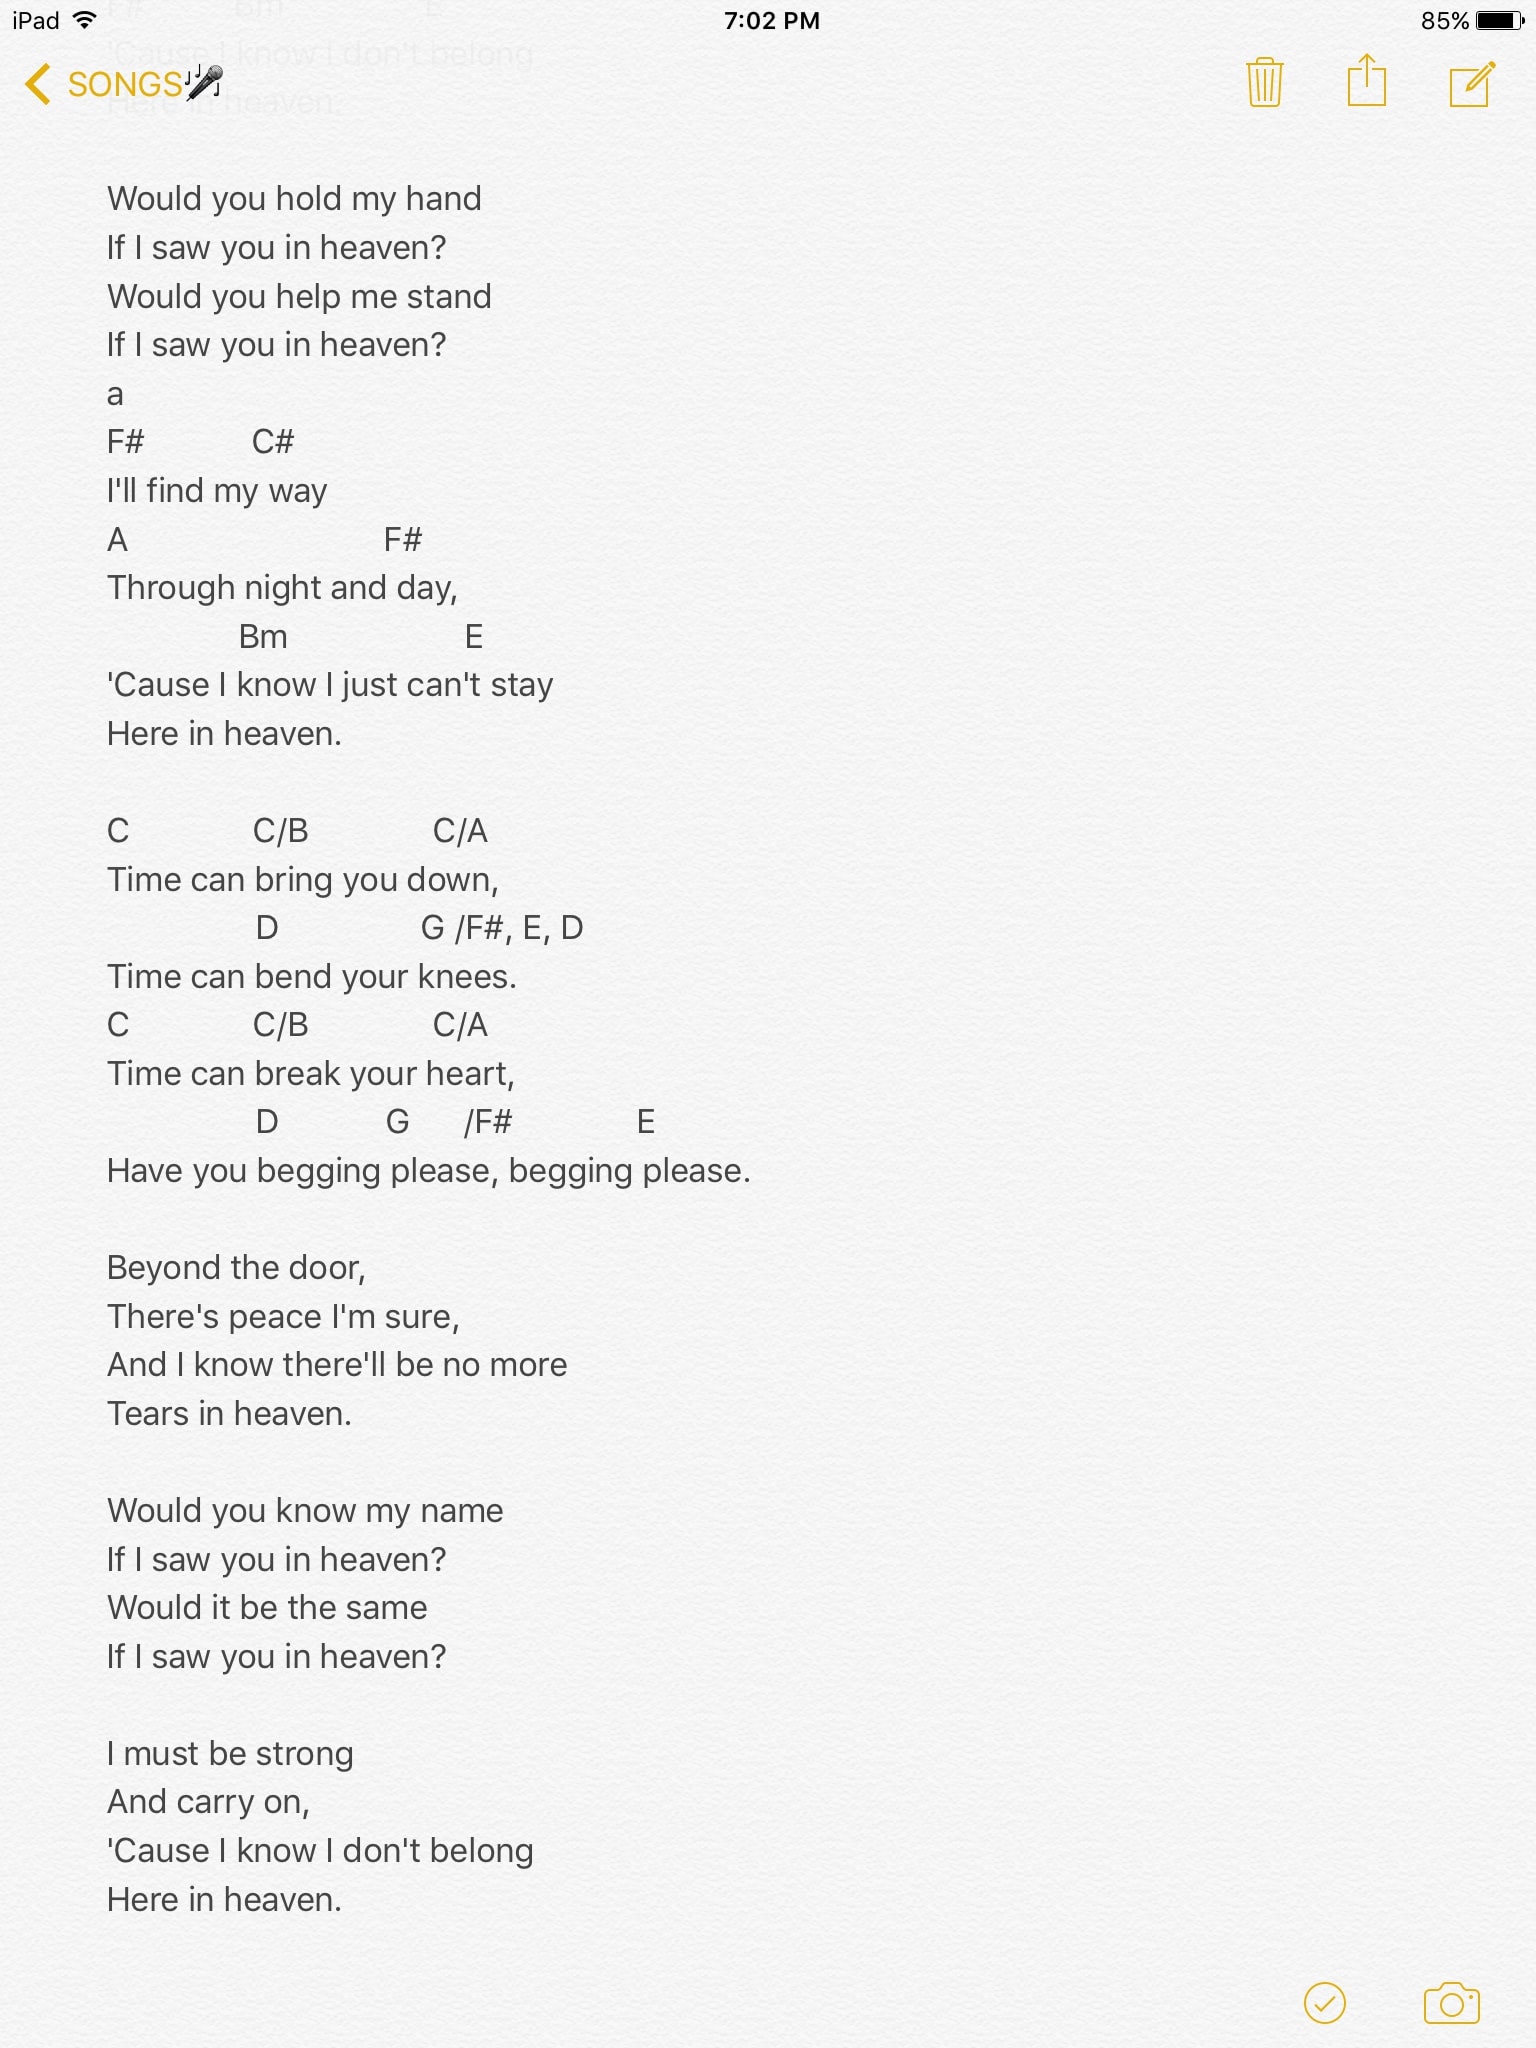 Song Lyrics with guitar chords for Tears In Heaven - Eric Clapton